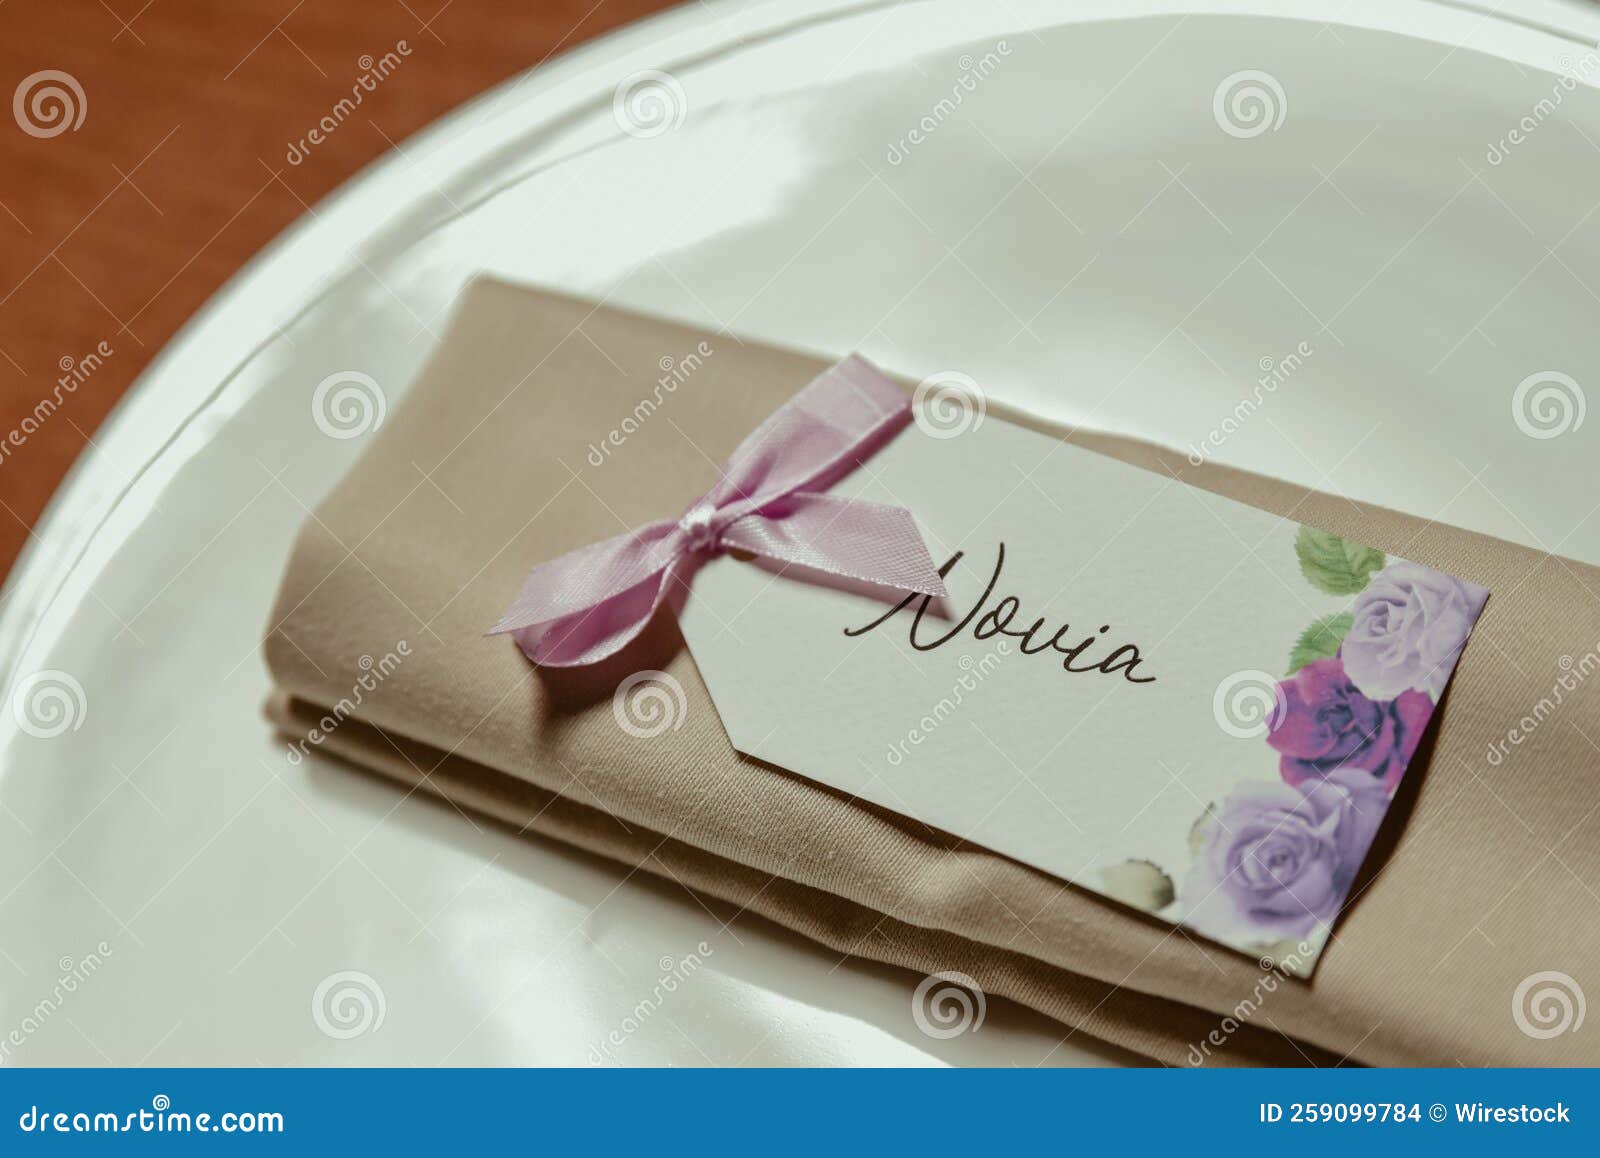 closeup shot of a floral novia name tag on a cloth in a plate